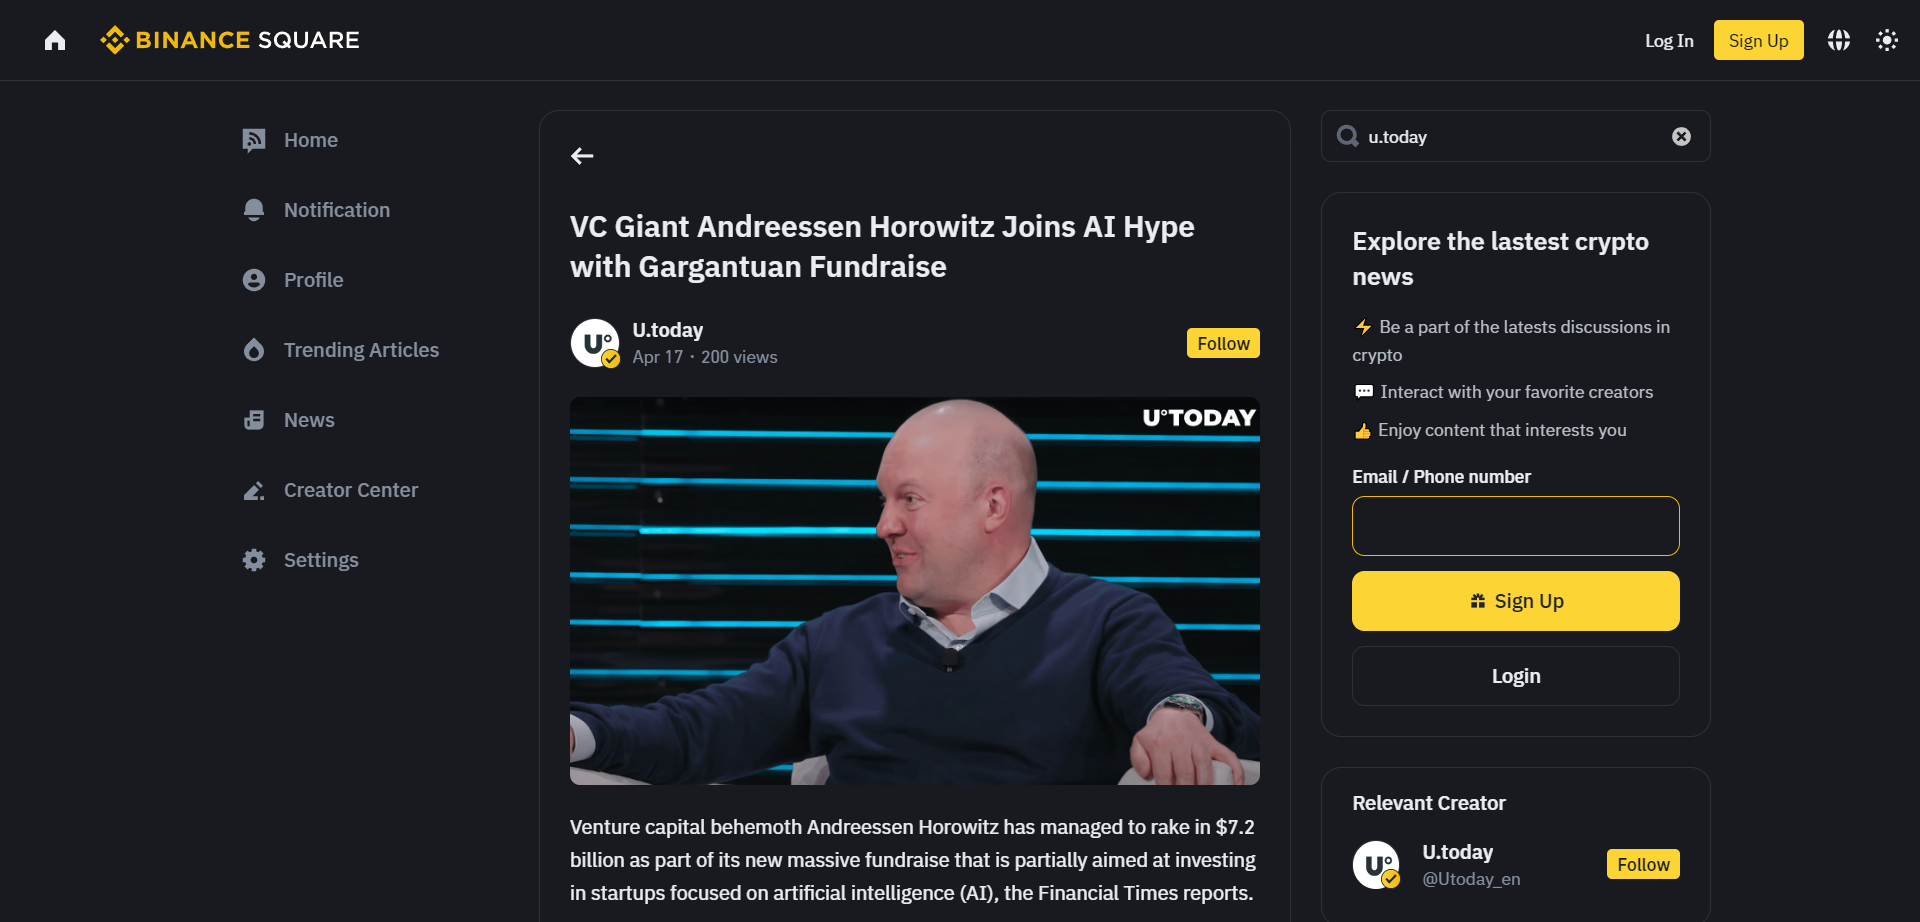 U.Today content is now available at Binance Square